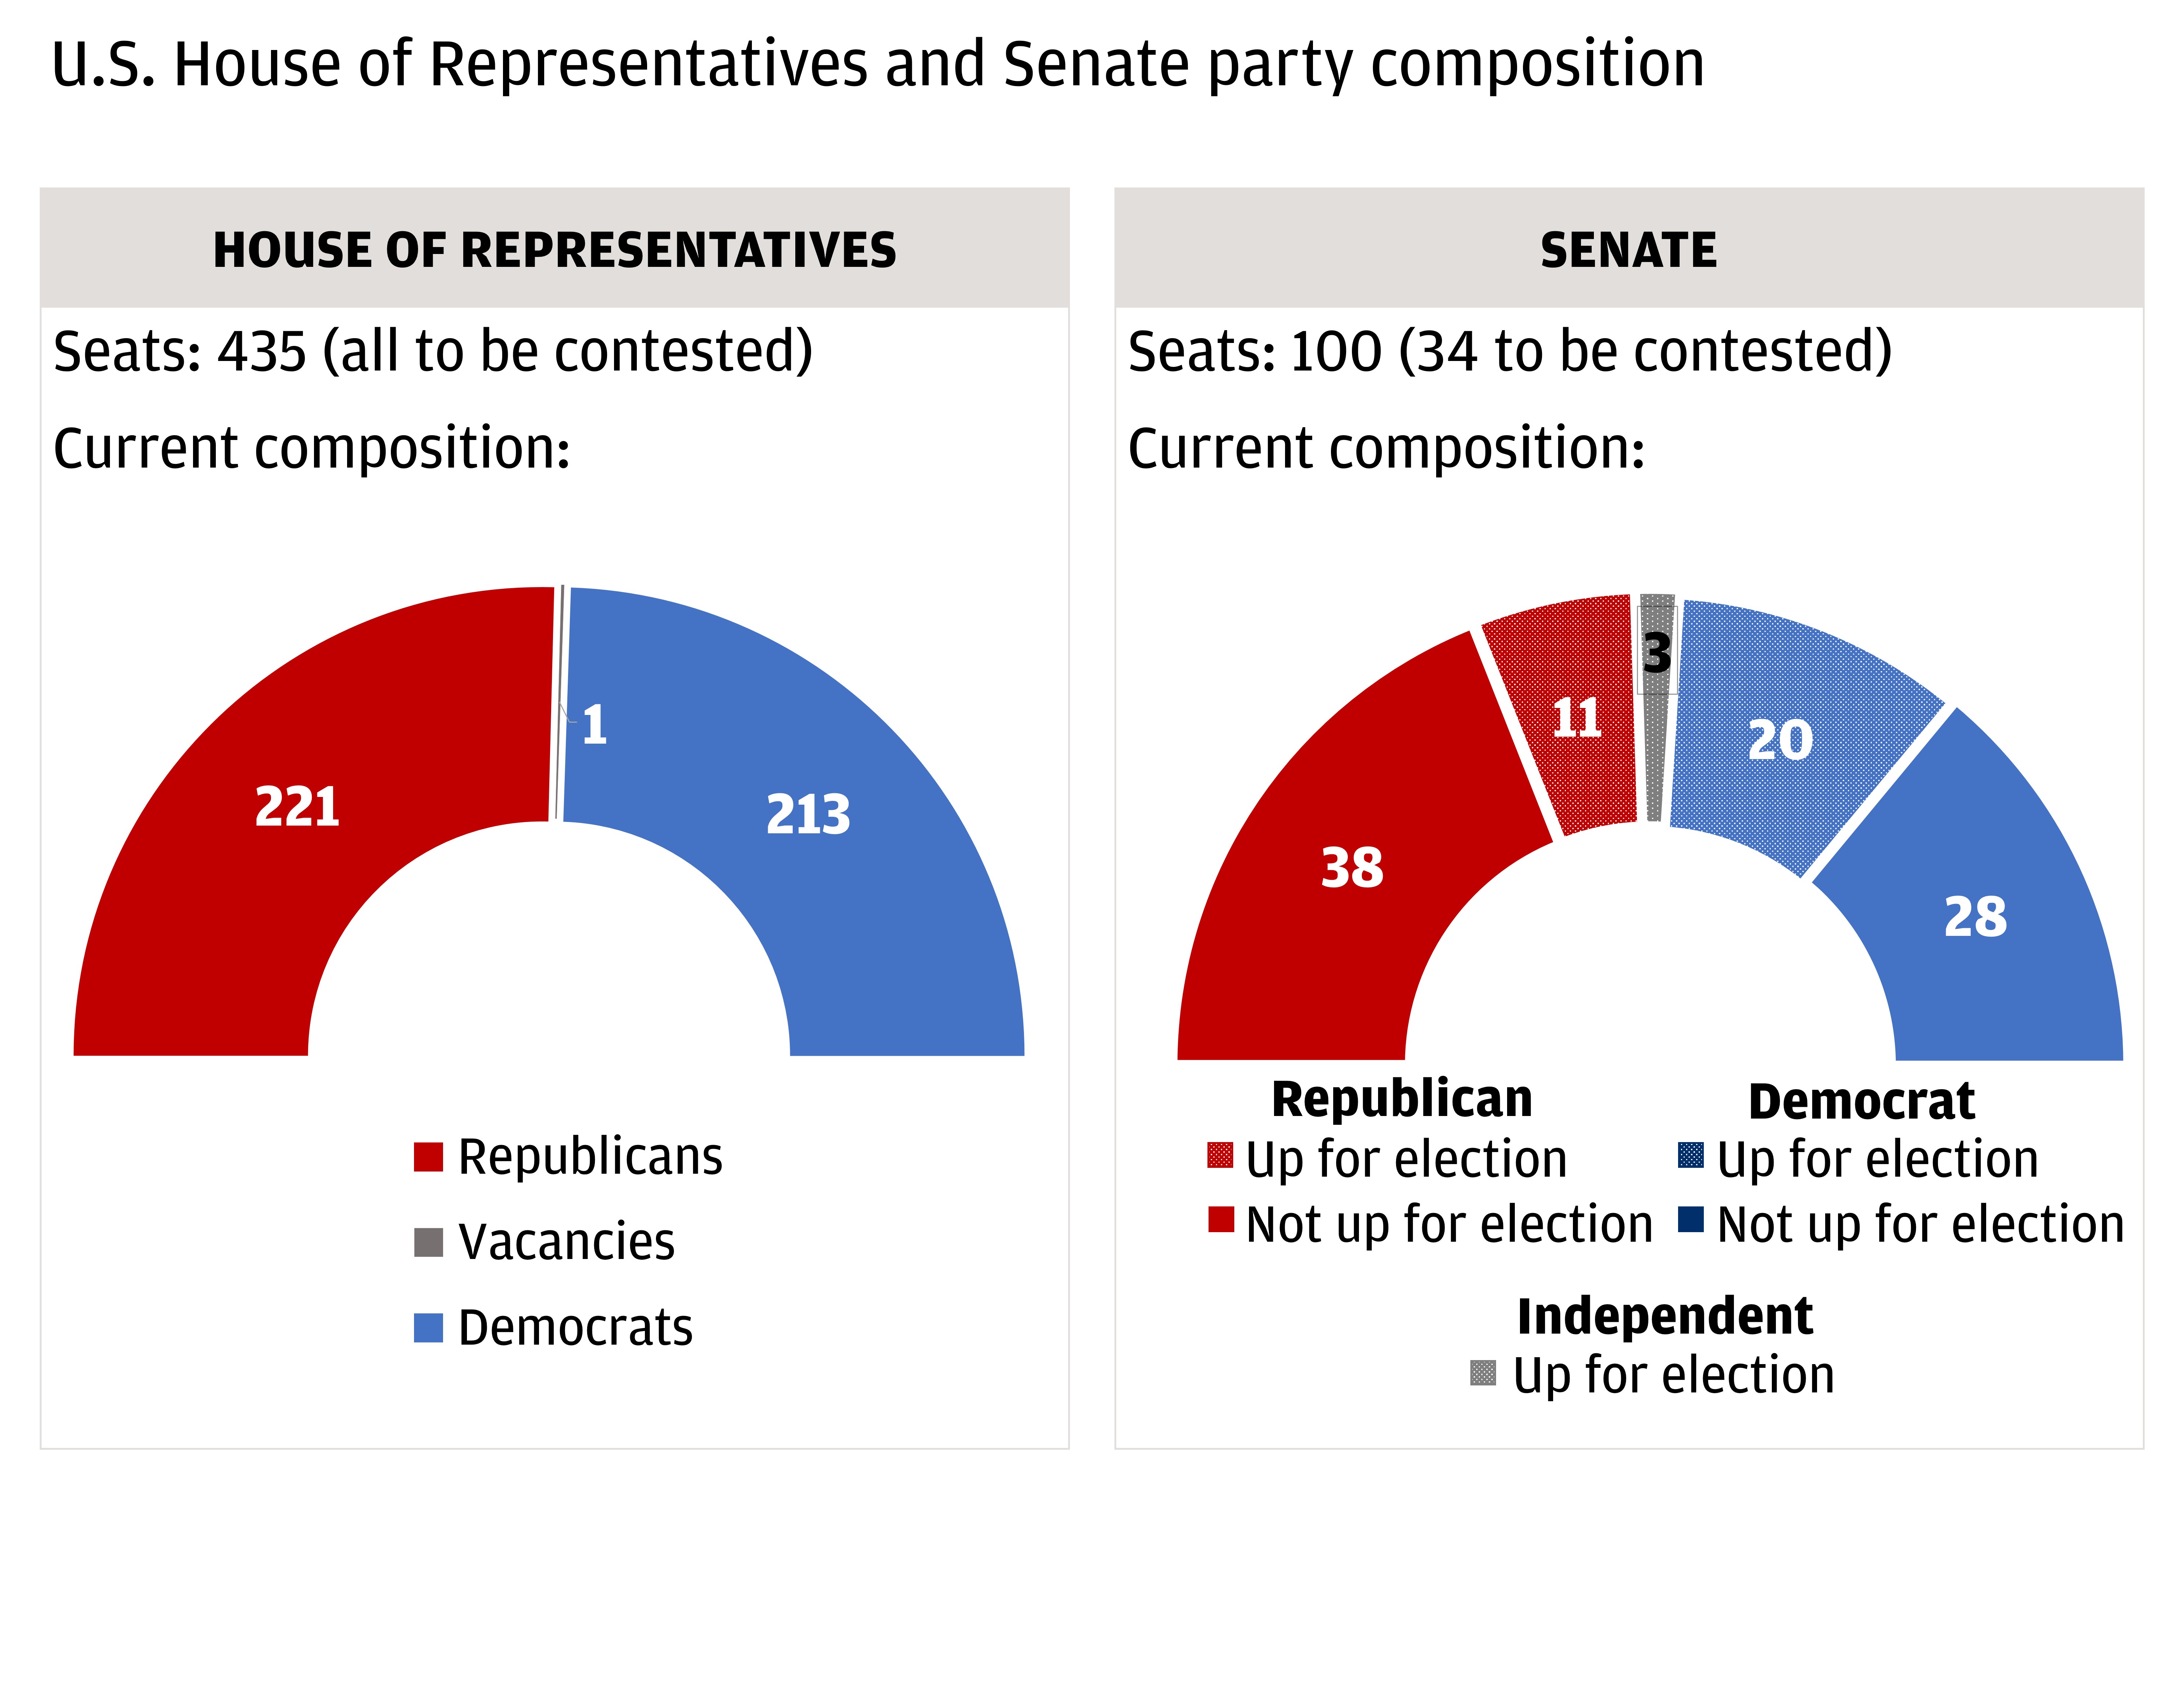 The chart shows two different donut charts representing the split between Republican and Democrat seats in the House of Representatives on the left and the Senate on the right.